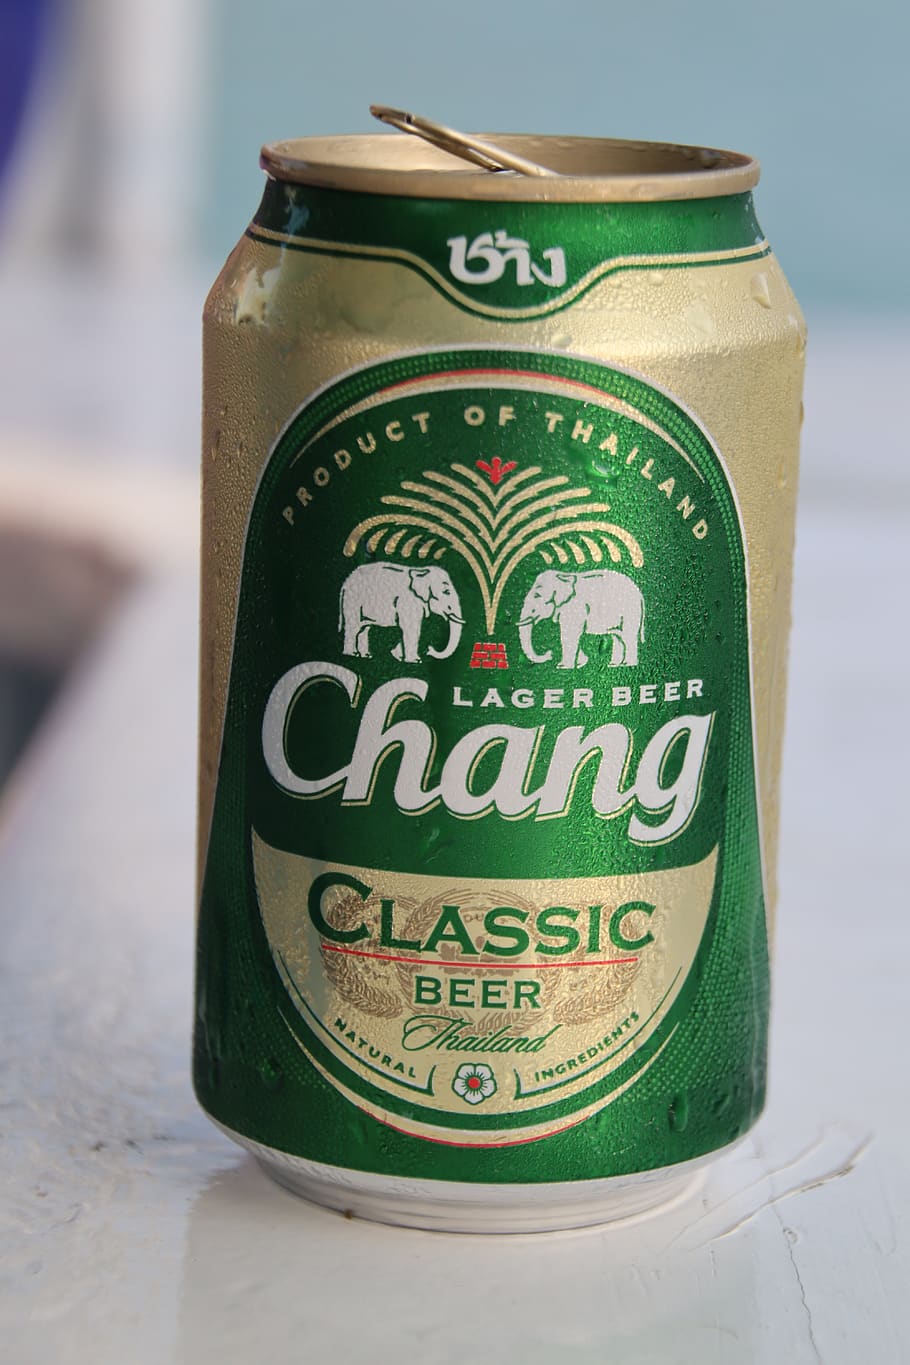 box, beer, drink, lager, thailand, text, communication, close-up, still life, focus on foreground